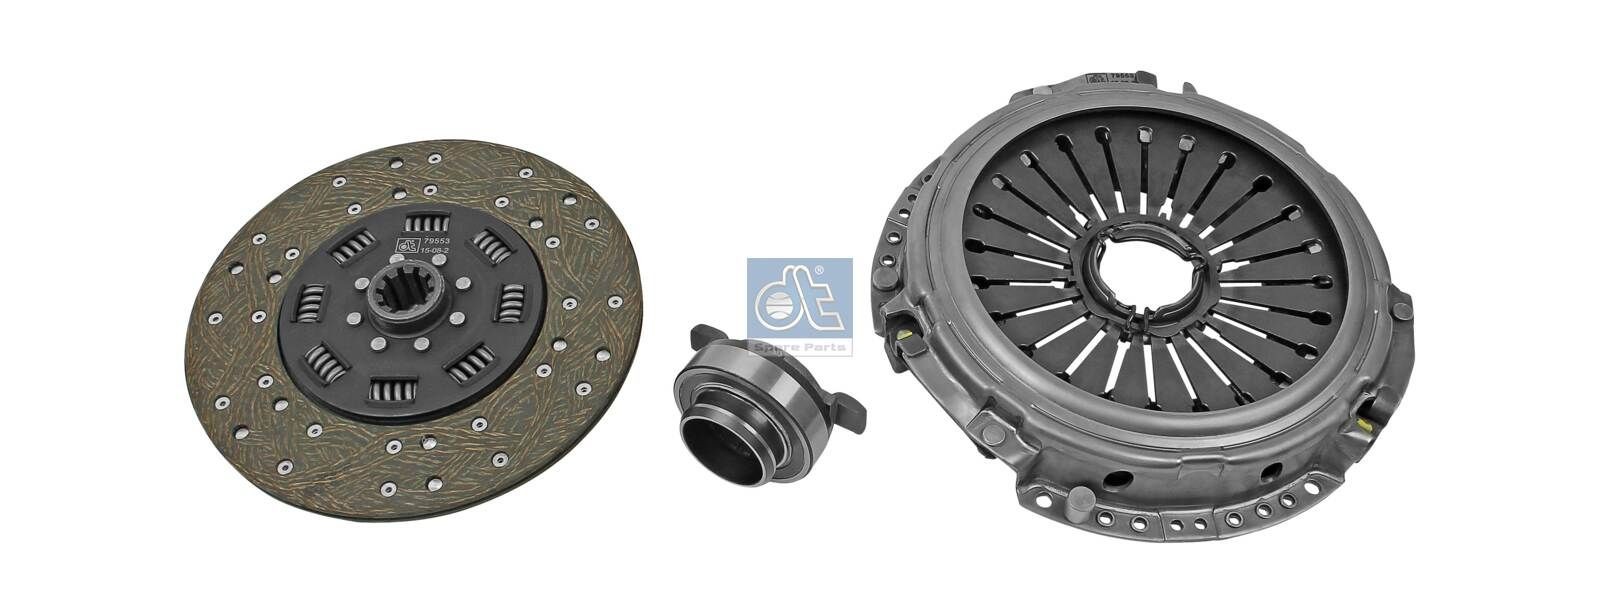 Original DT Spare Parts 3400 125 201 Clutch and flywheel kit 4.91977 for MERCEDES-BENZ C-Class